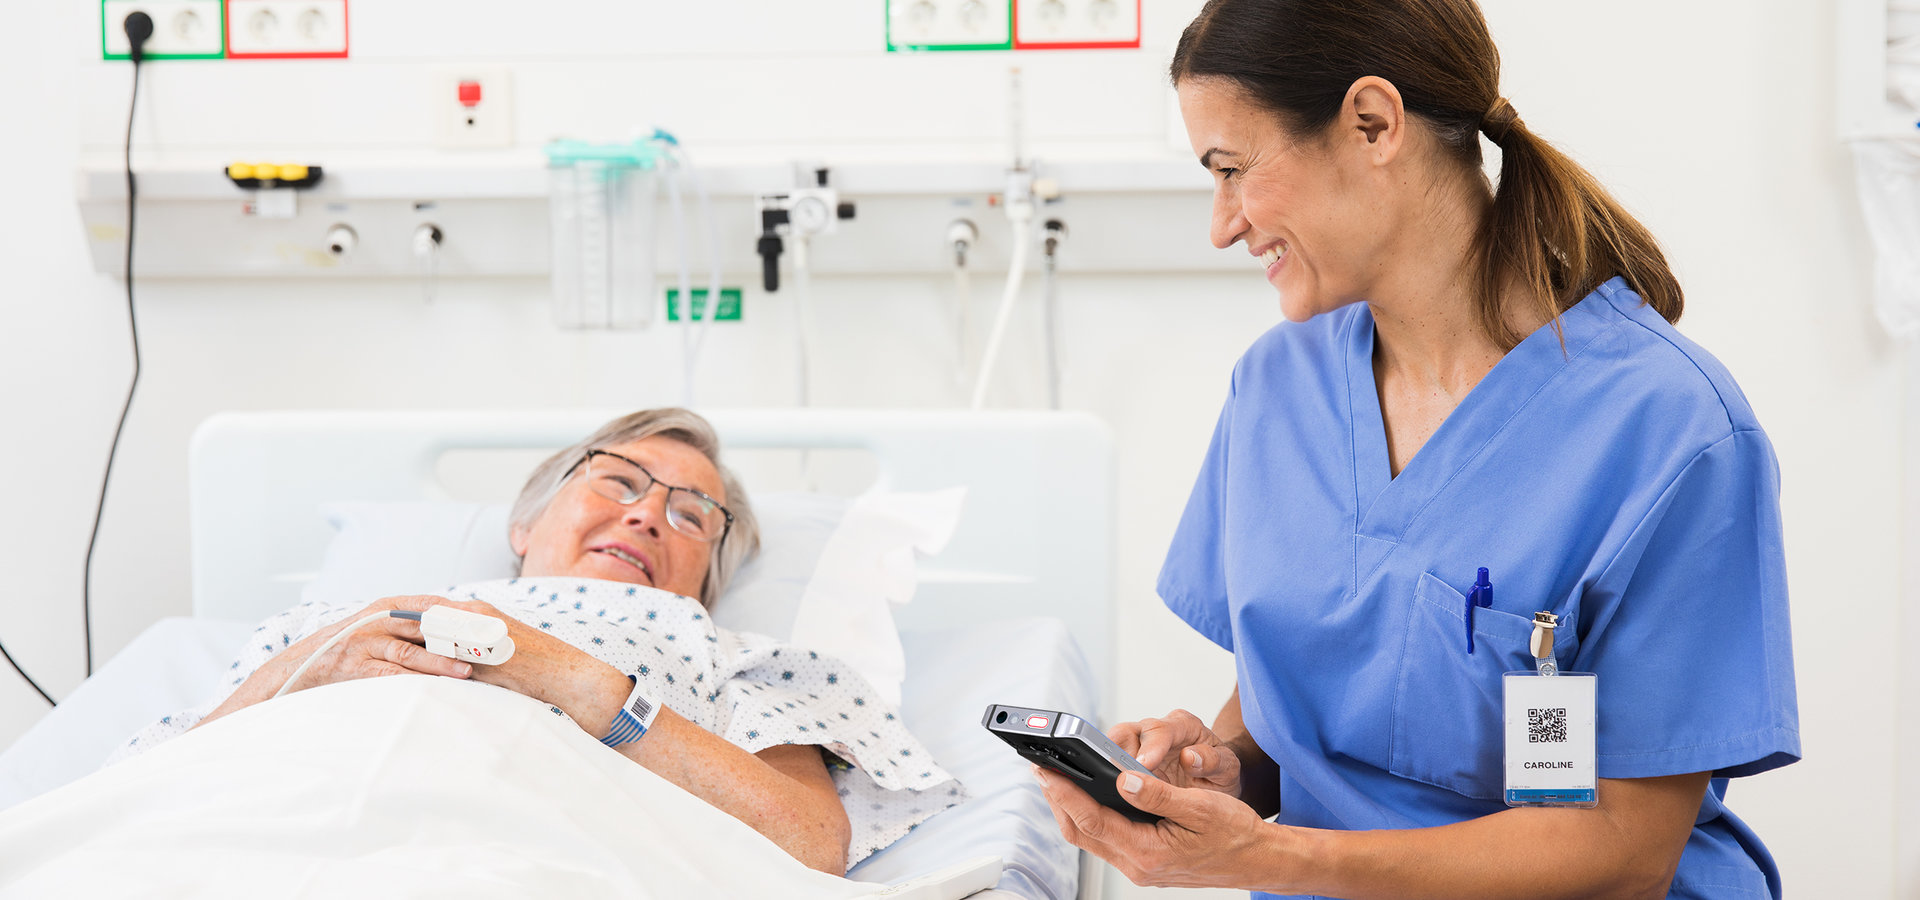 A medical doctor or a nurse with a patient, by the patient's hospital bed. Both the patient and the nurse are smiling and probably in a conversation; the nurse is holding and typing on a nurse call or communication system device.